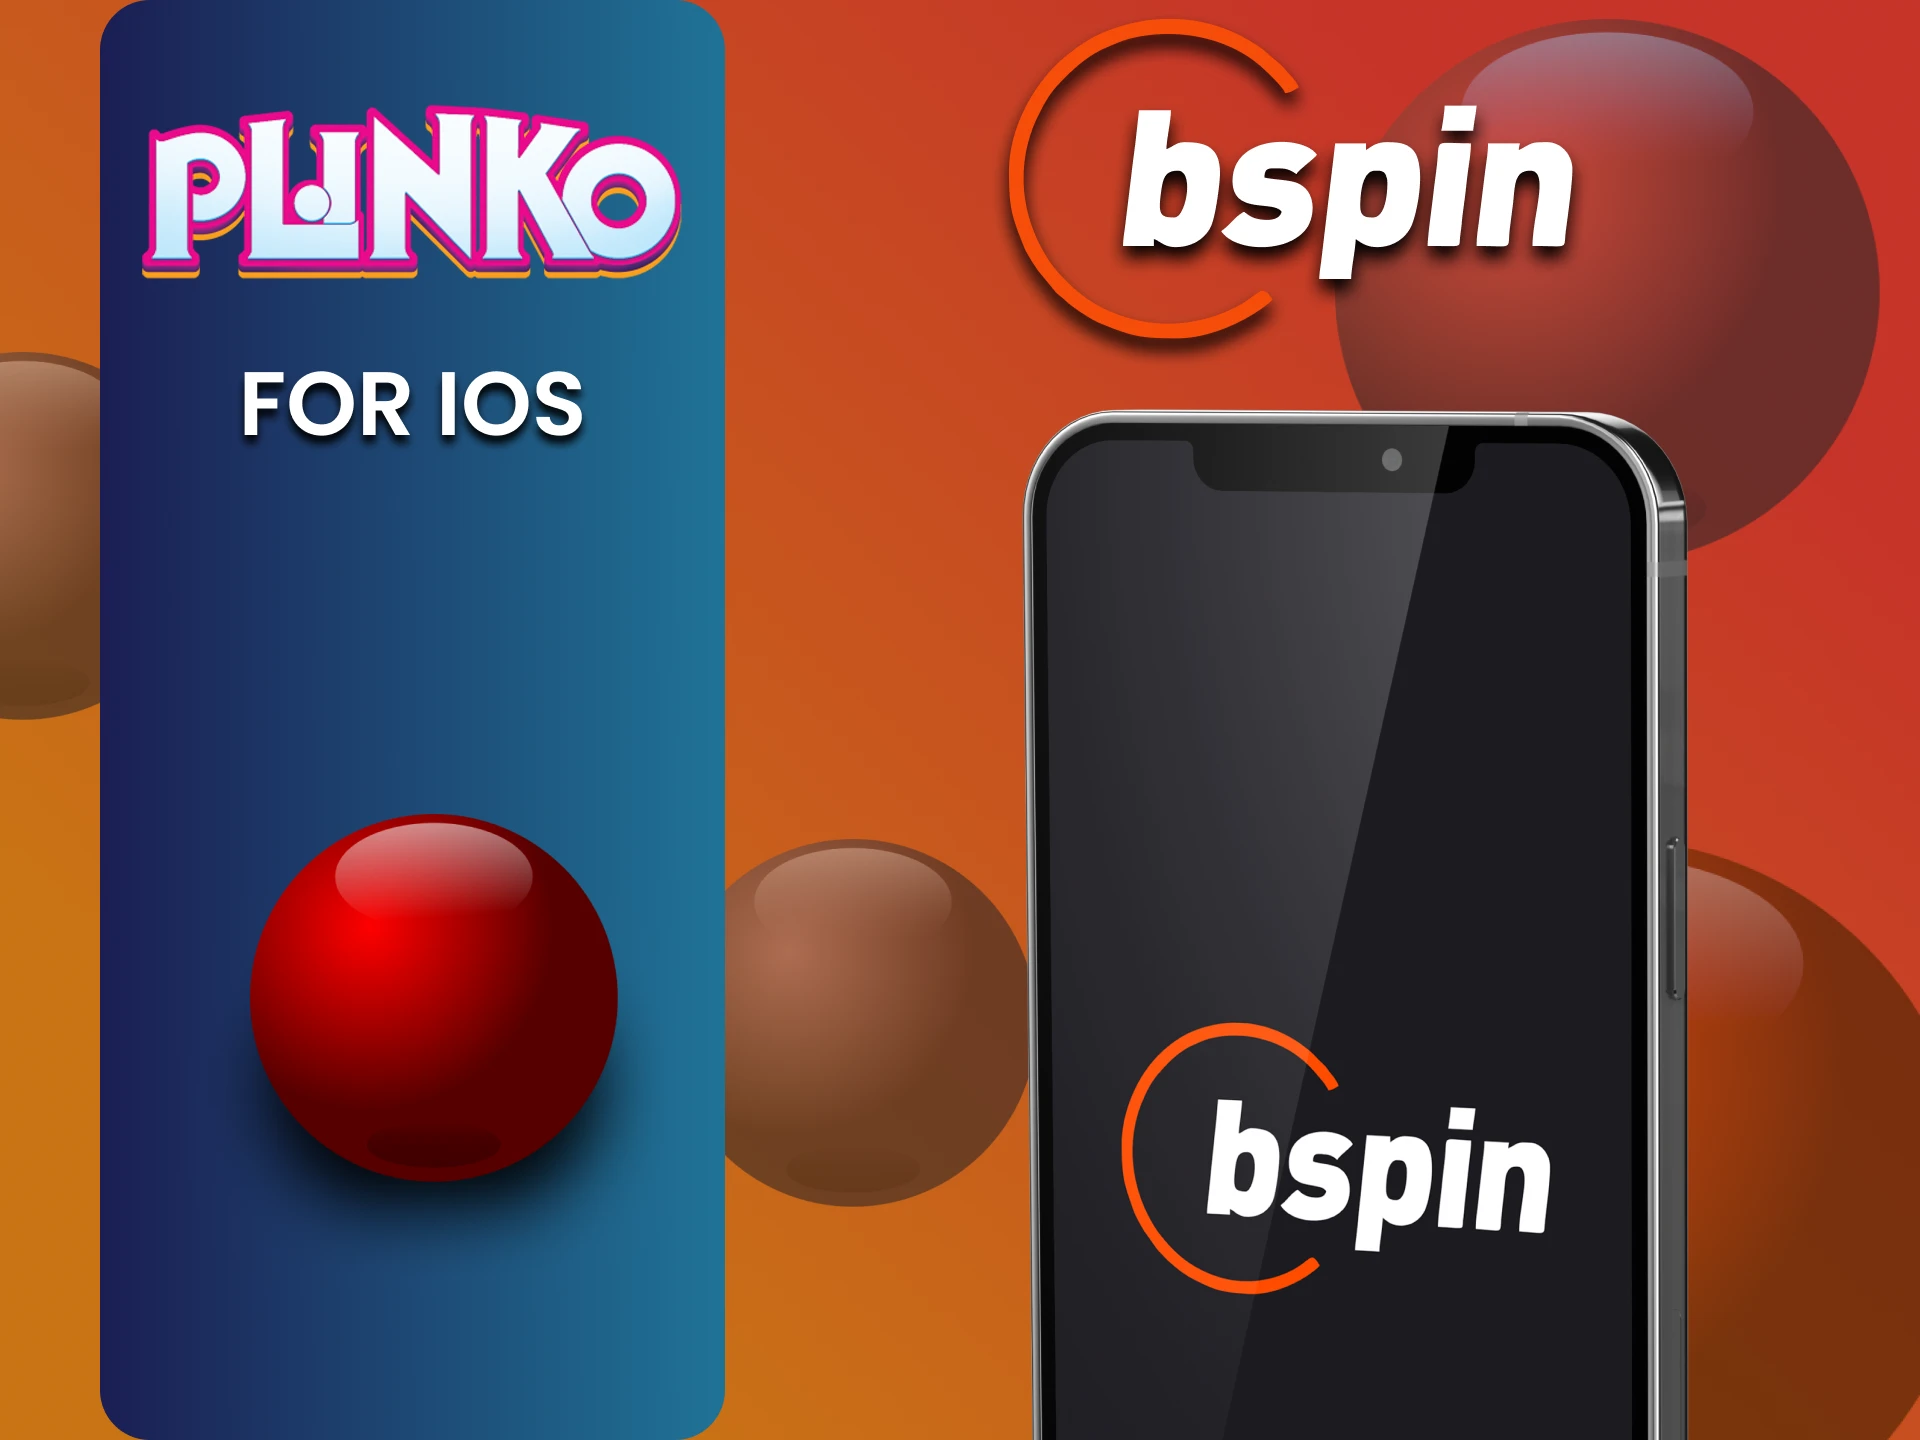 To play Plinko, download the Bspin app on iOS.